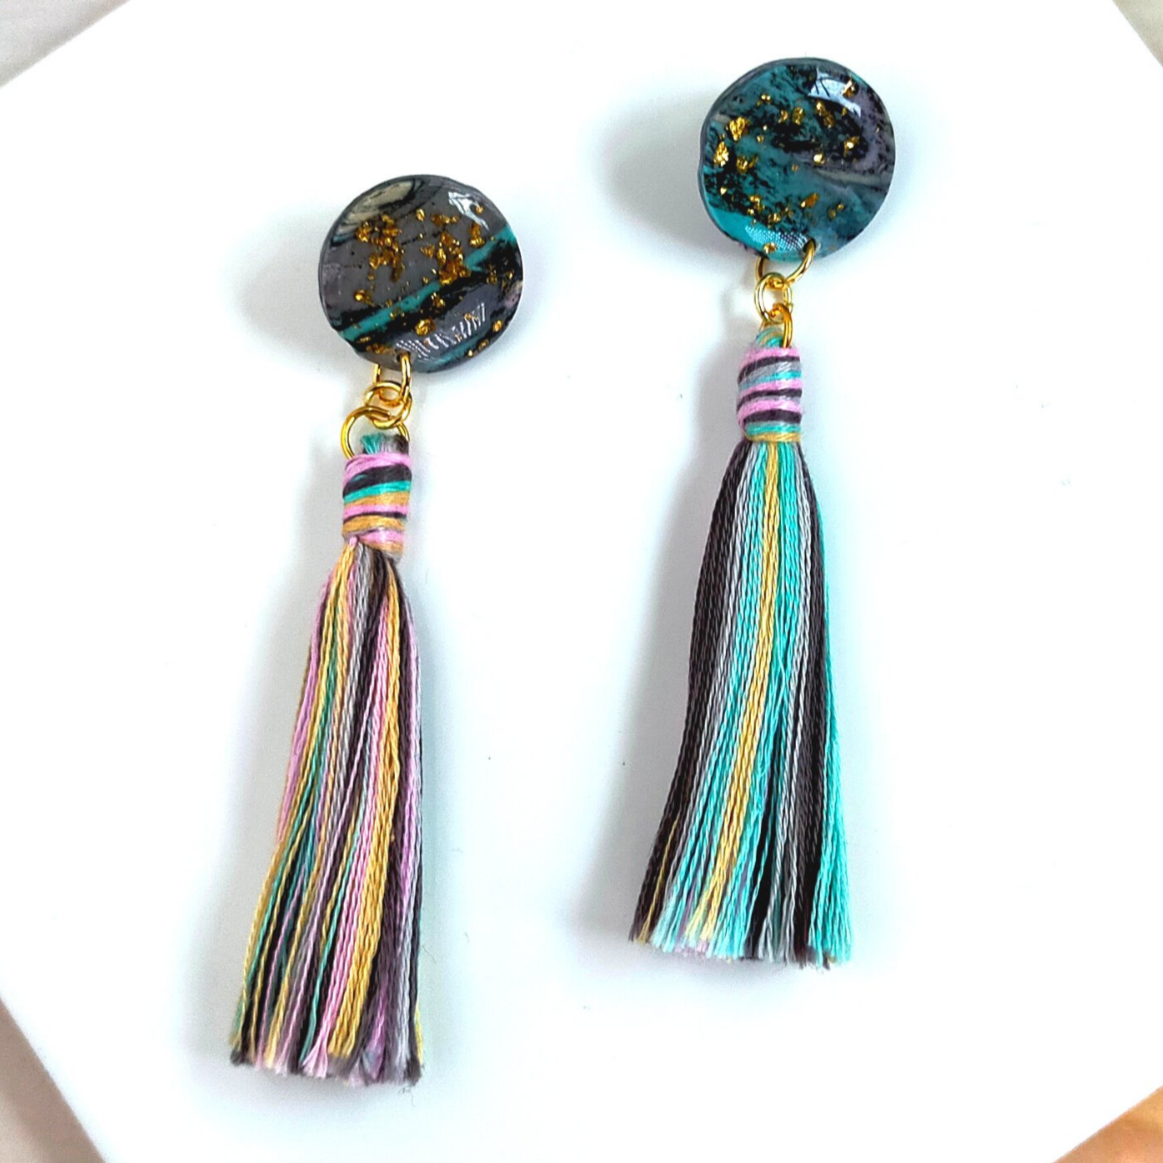 "Harlow" Polymer Clay Earrings with Tassel